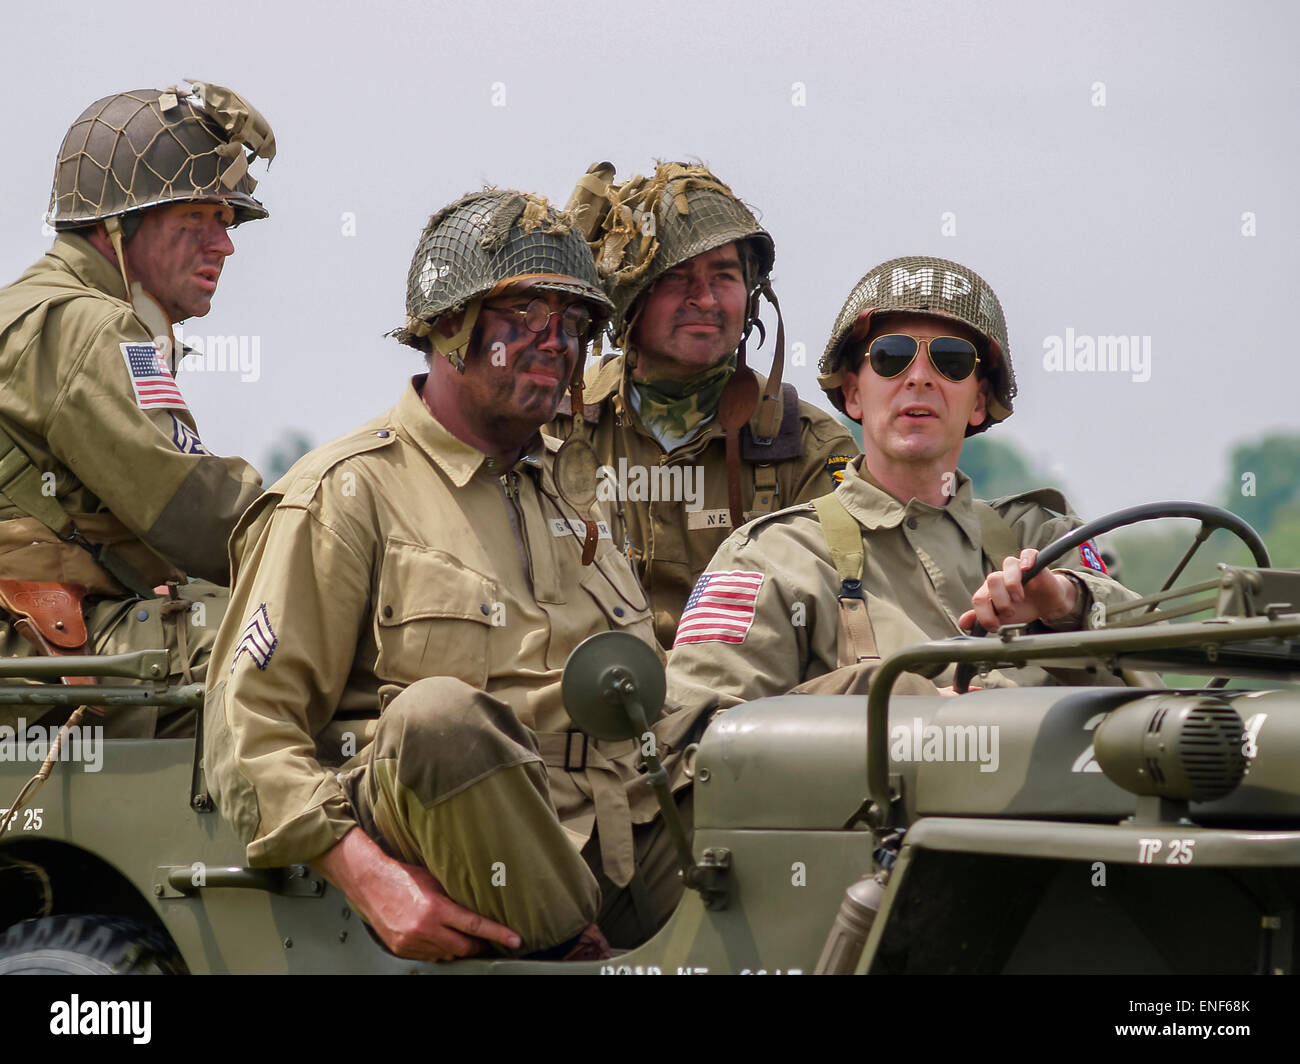 American US Allied Soldiers in WW2 Uniform seated in a Willys Jeep as part of the D-Day Anniversary, Normandy France Stock Photo